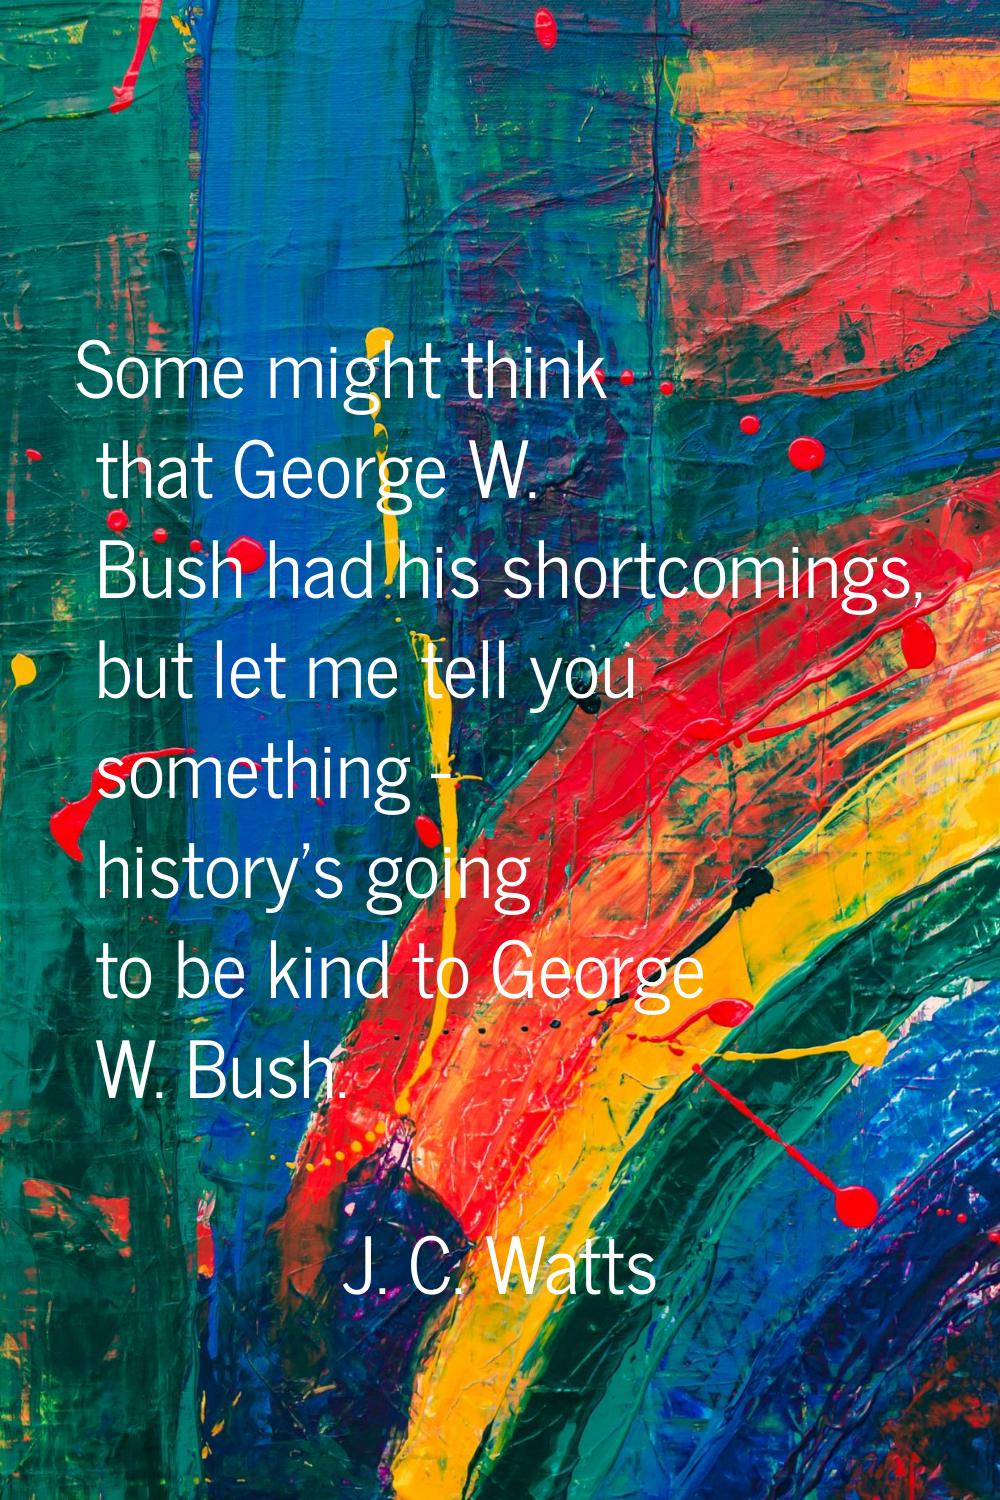 Some might think that George W. Bush had his shortcomings, but let me tell you something - history'